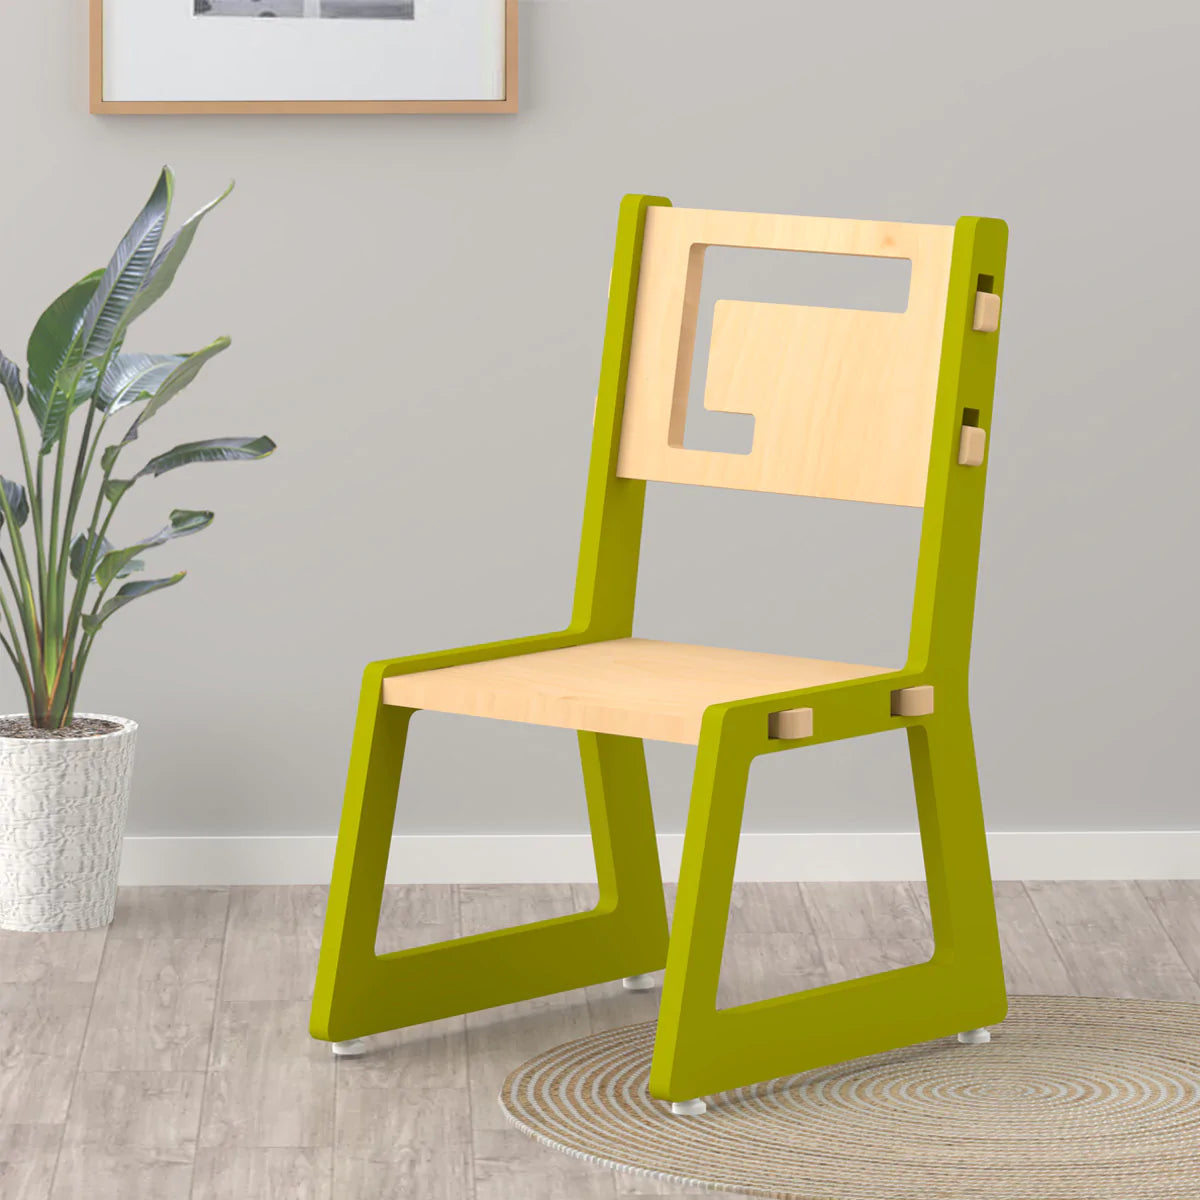 Buy Blue Apple Wooden Chair - Green - Learning Furniture - SkilloToys.com